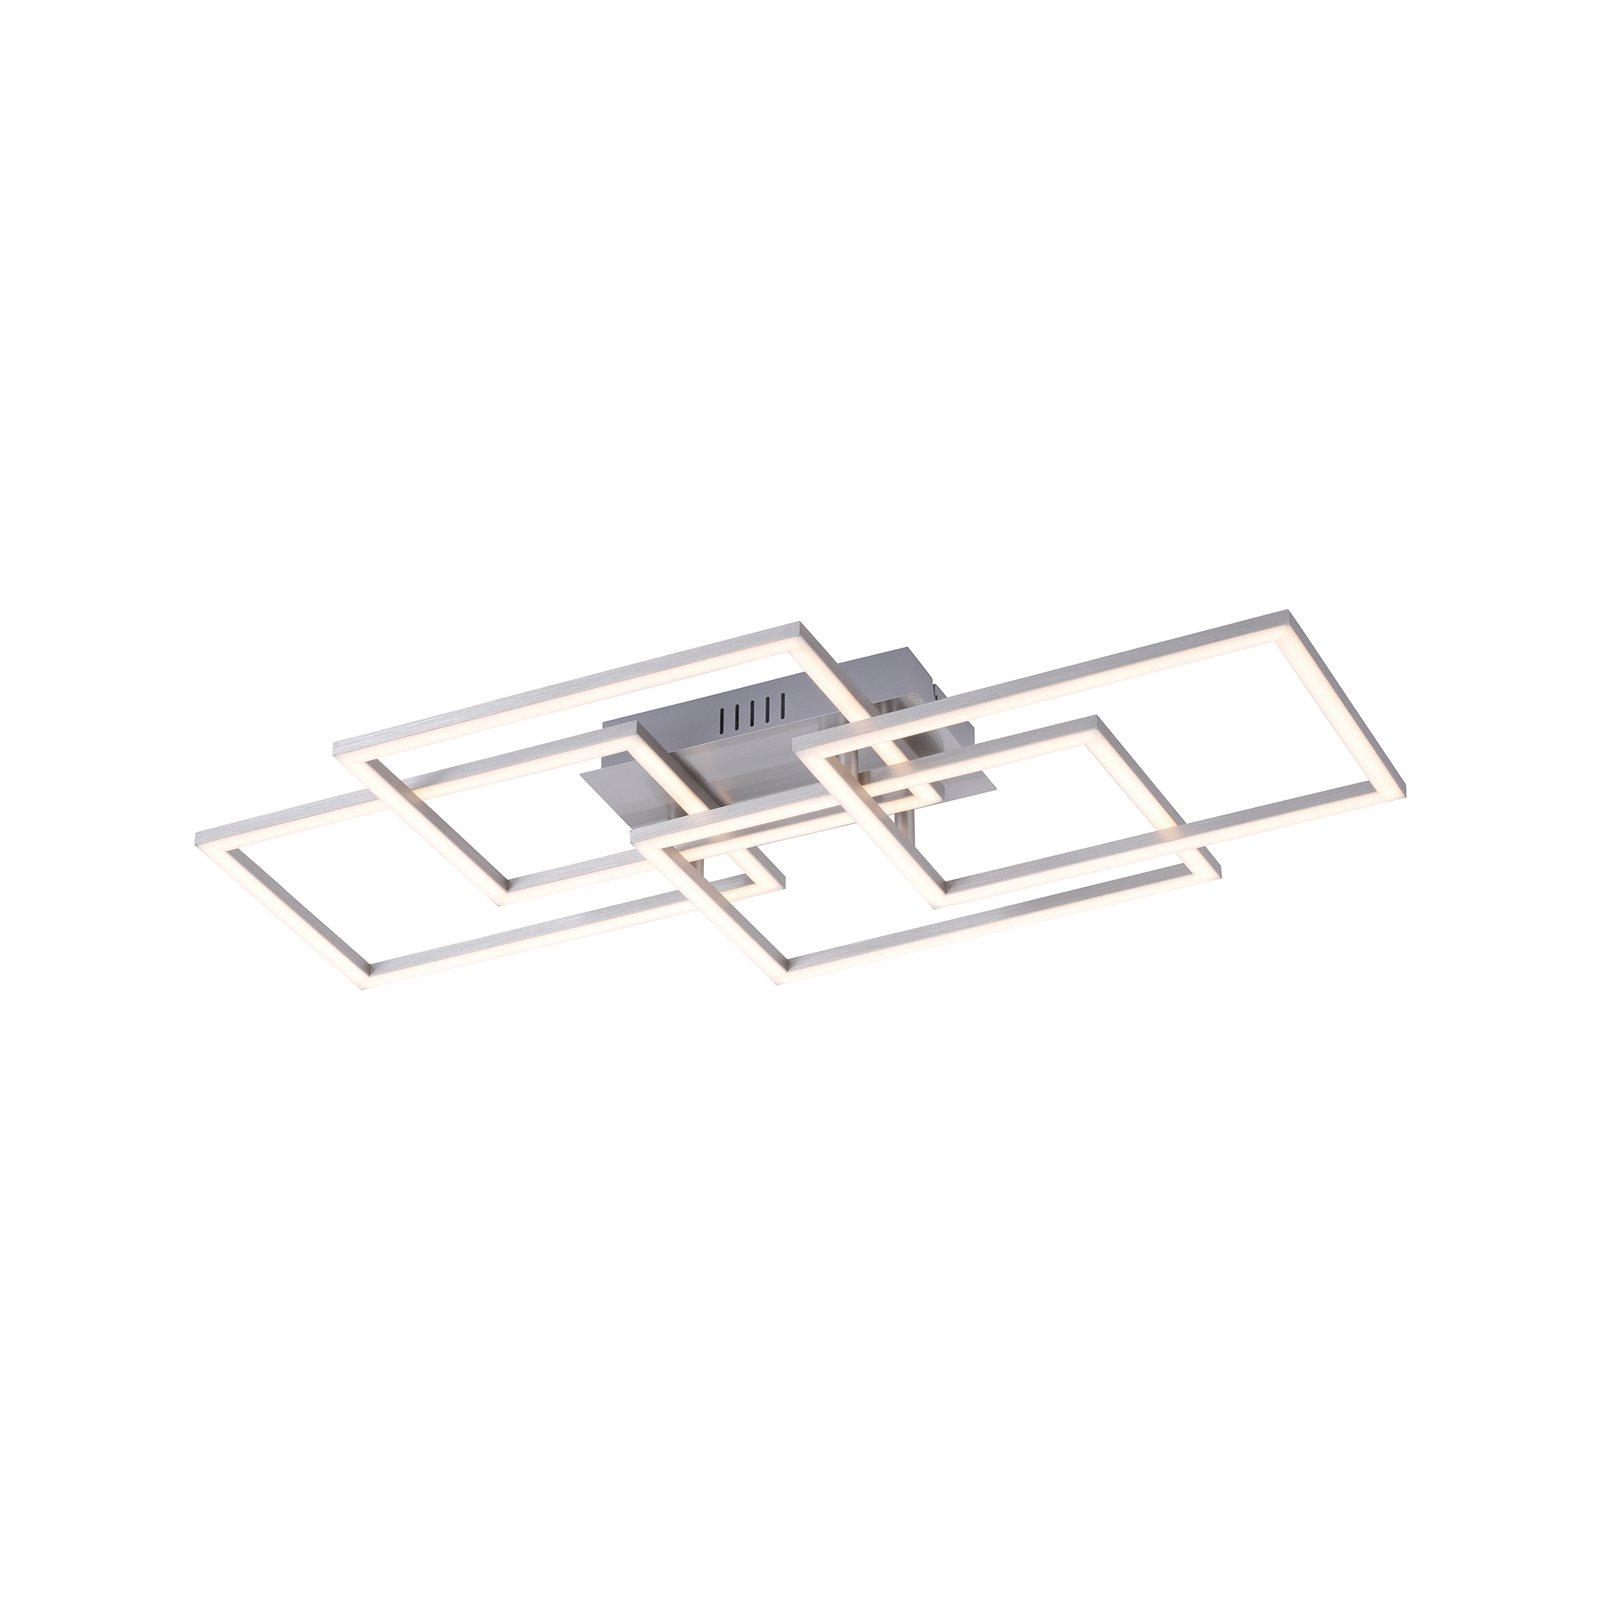 LED plafondlamp Iven, Dime, staal, 70x34,5cm